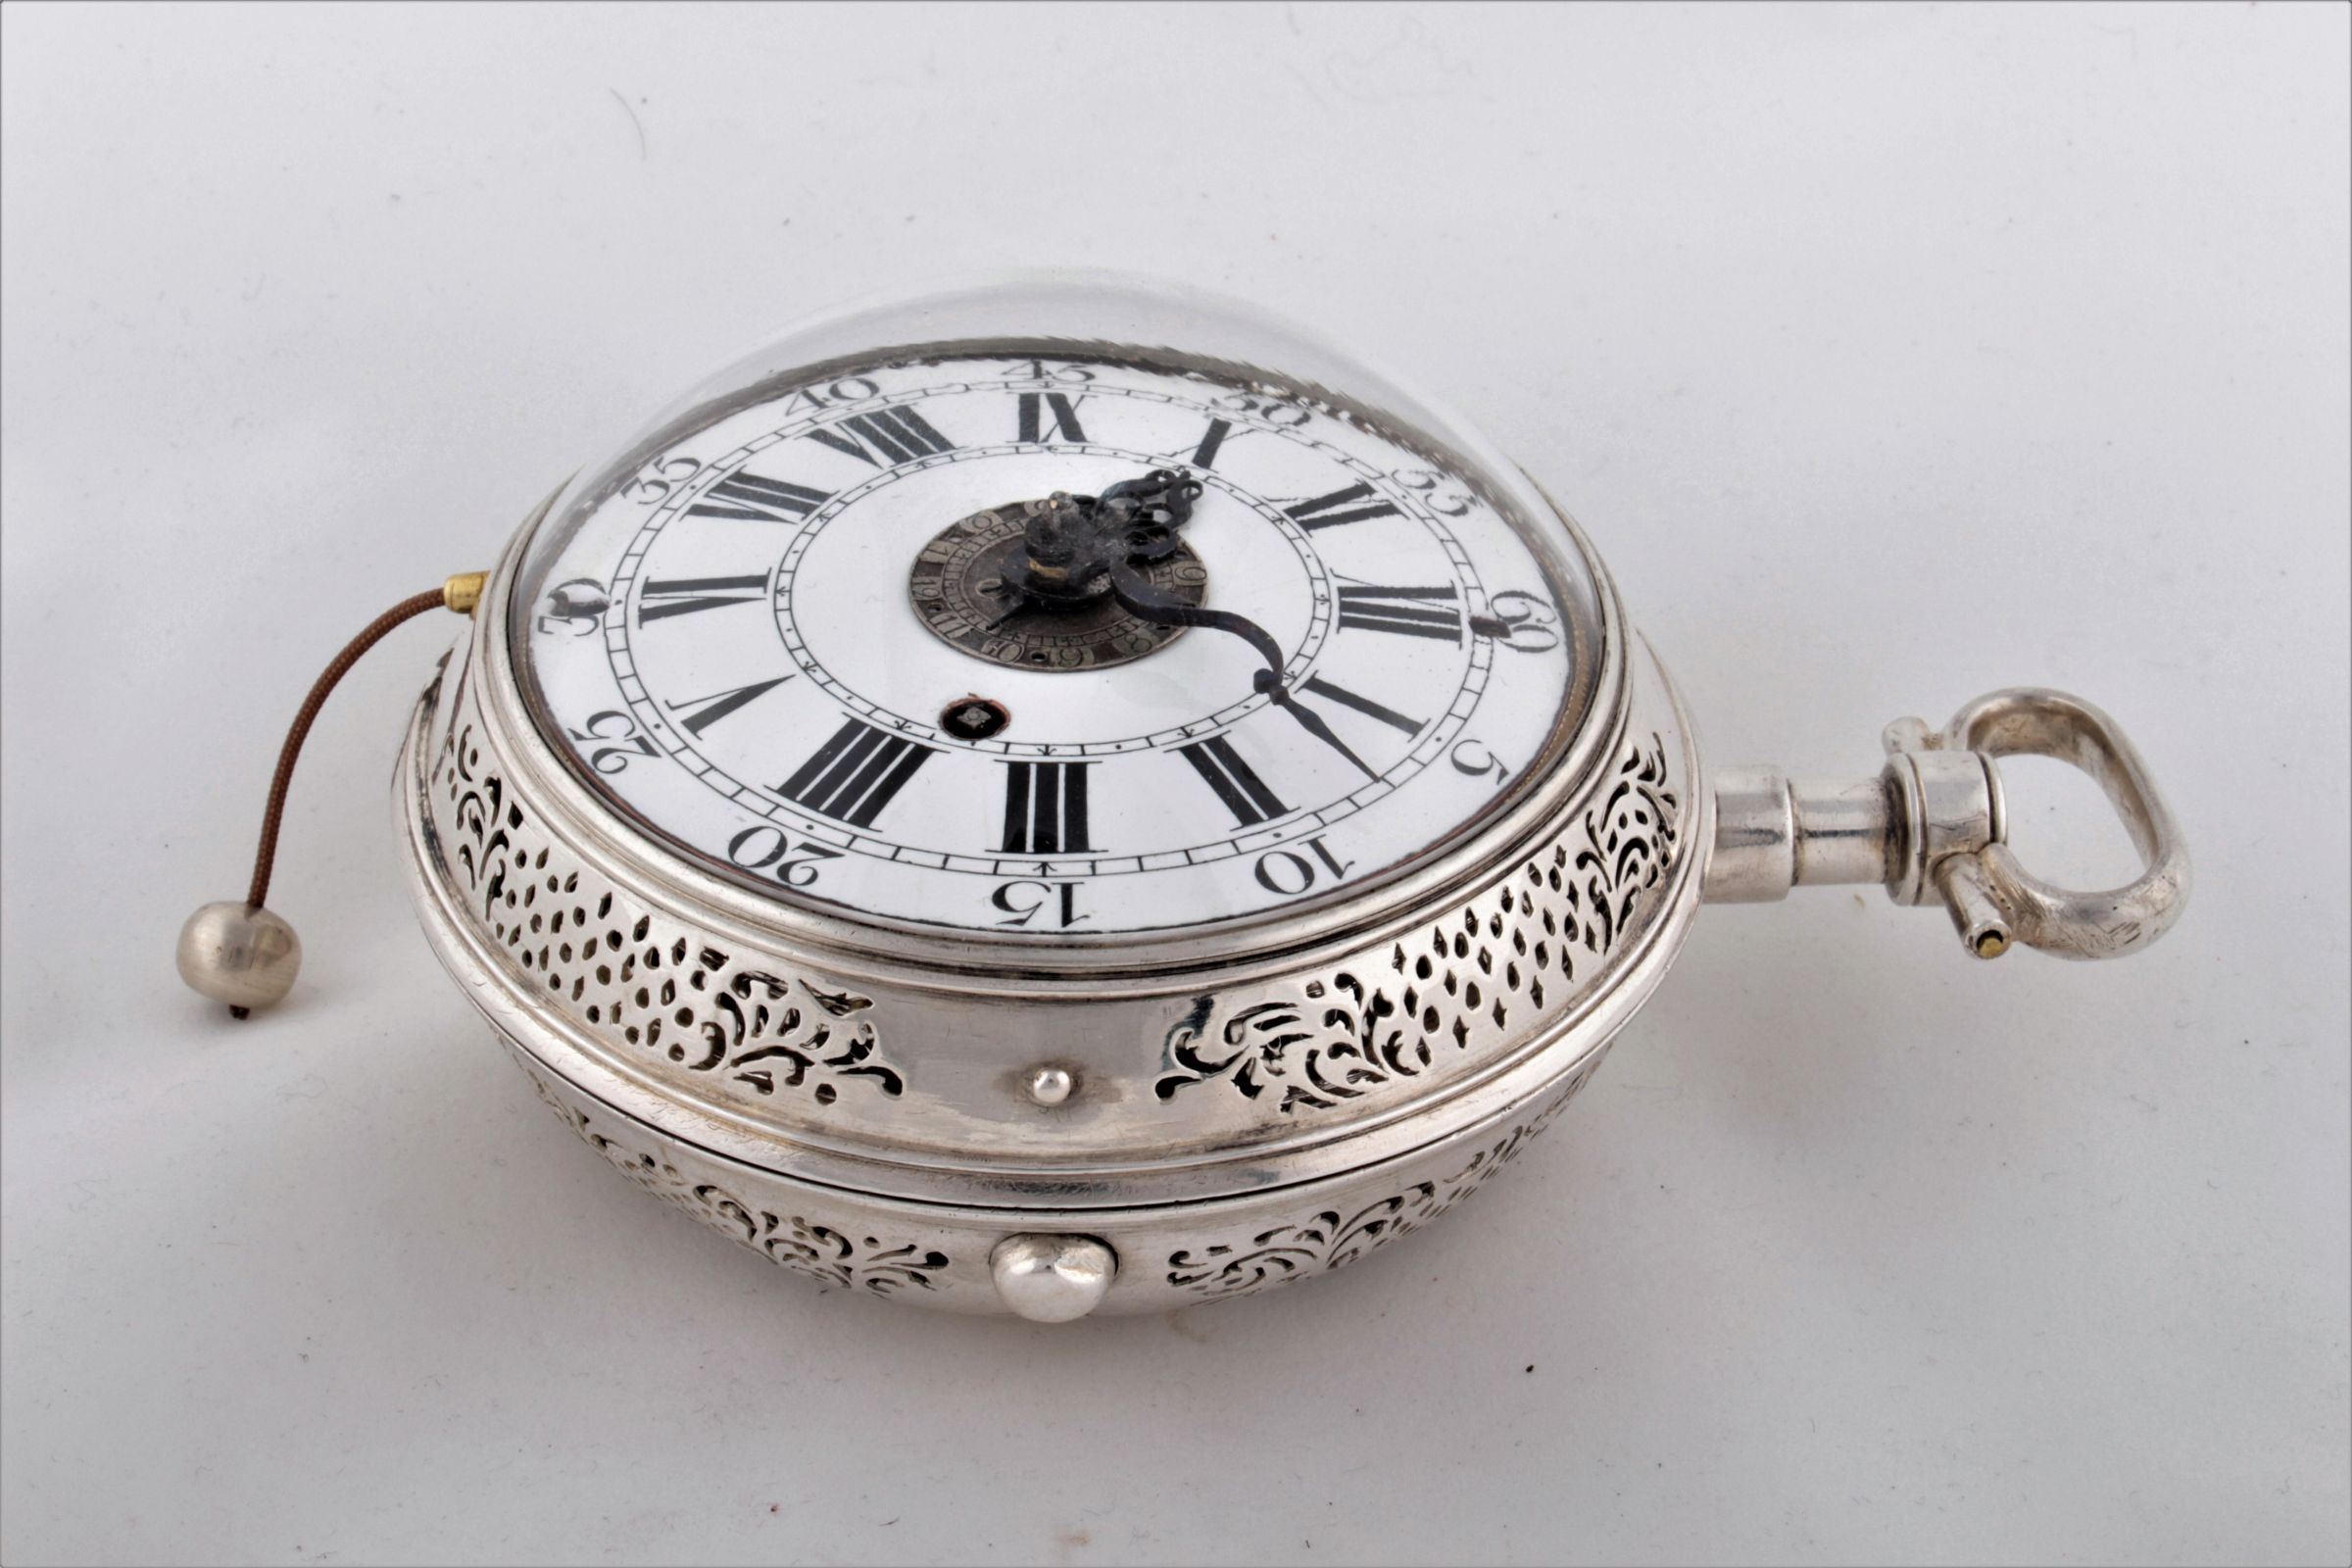 A large silver coach watch / coach clock labeled Jos. Mirroir Paris |  Watches | Antiques - Gallery USTAR